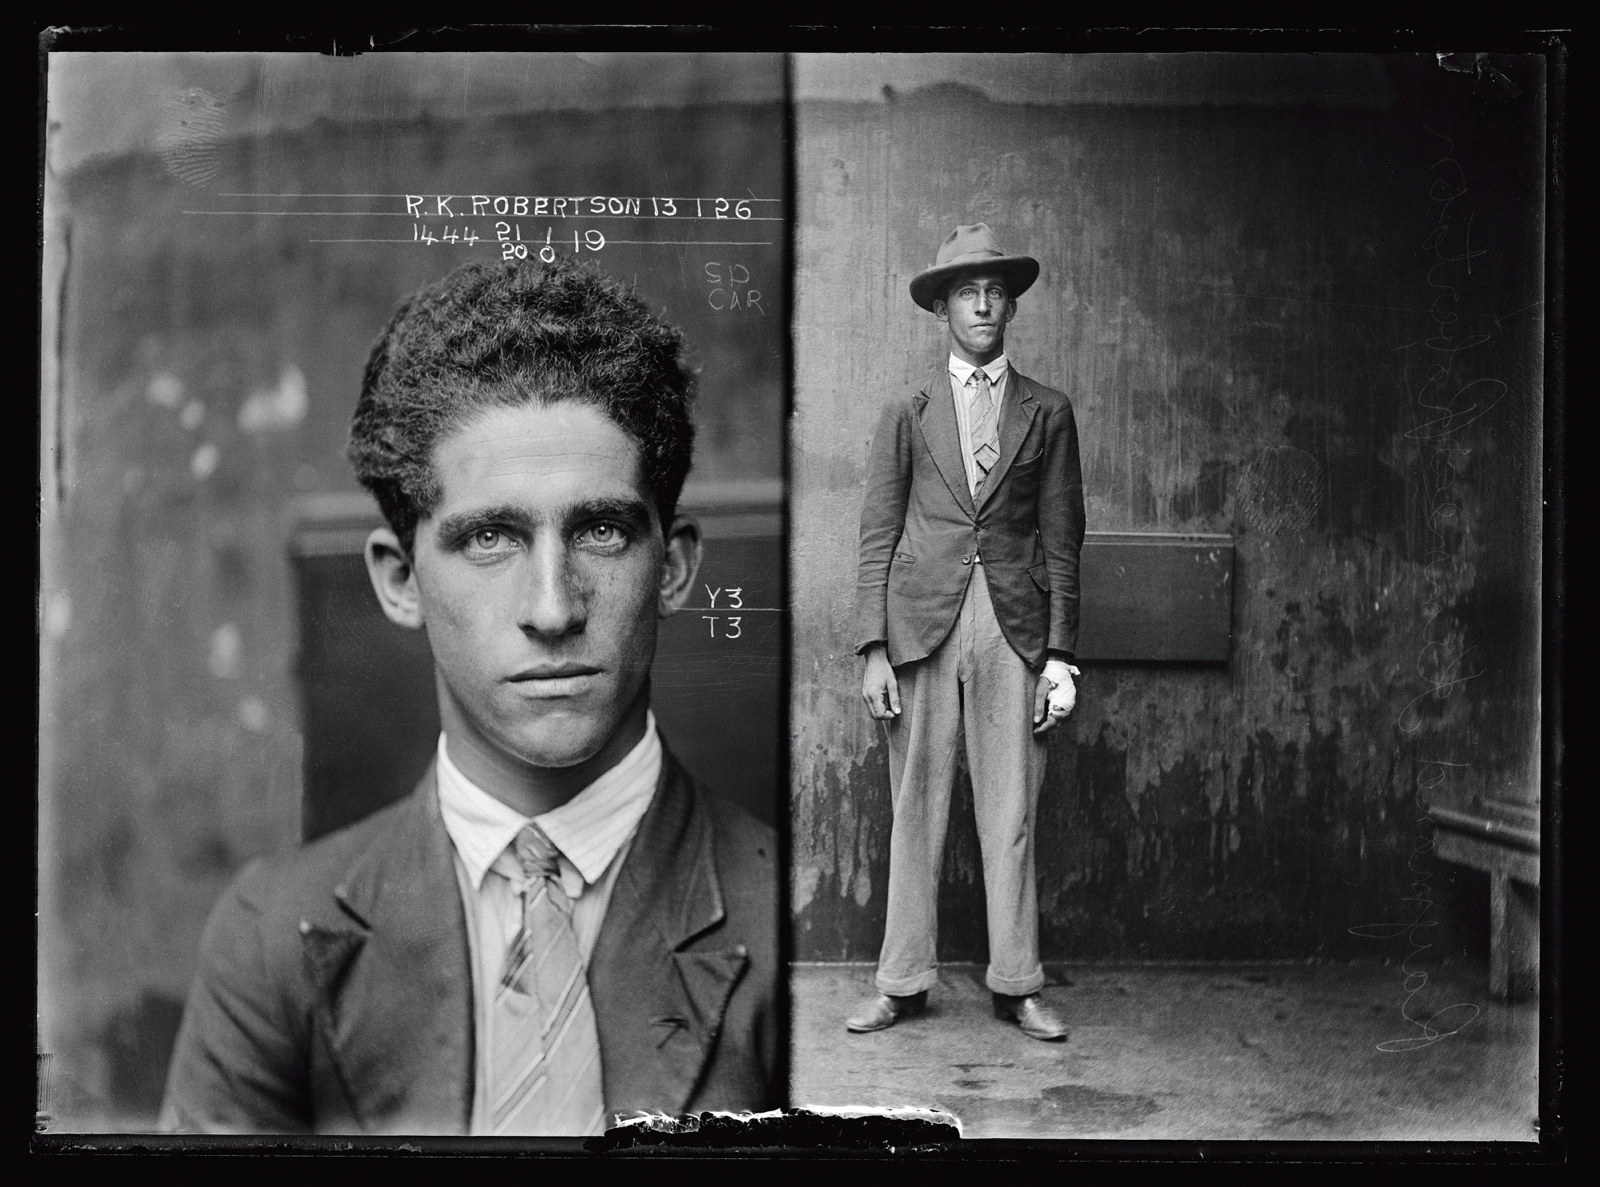 Dual mugshot in black and white; man seated and then man standing, with hat on.